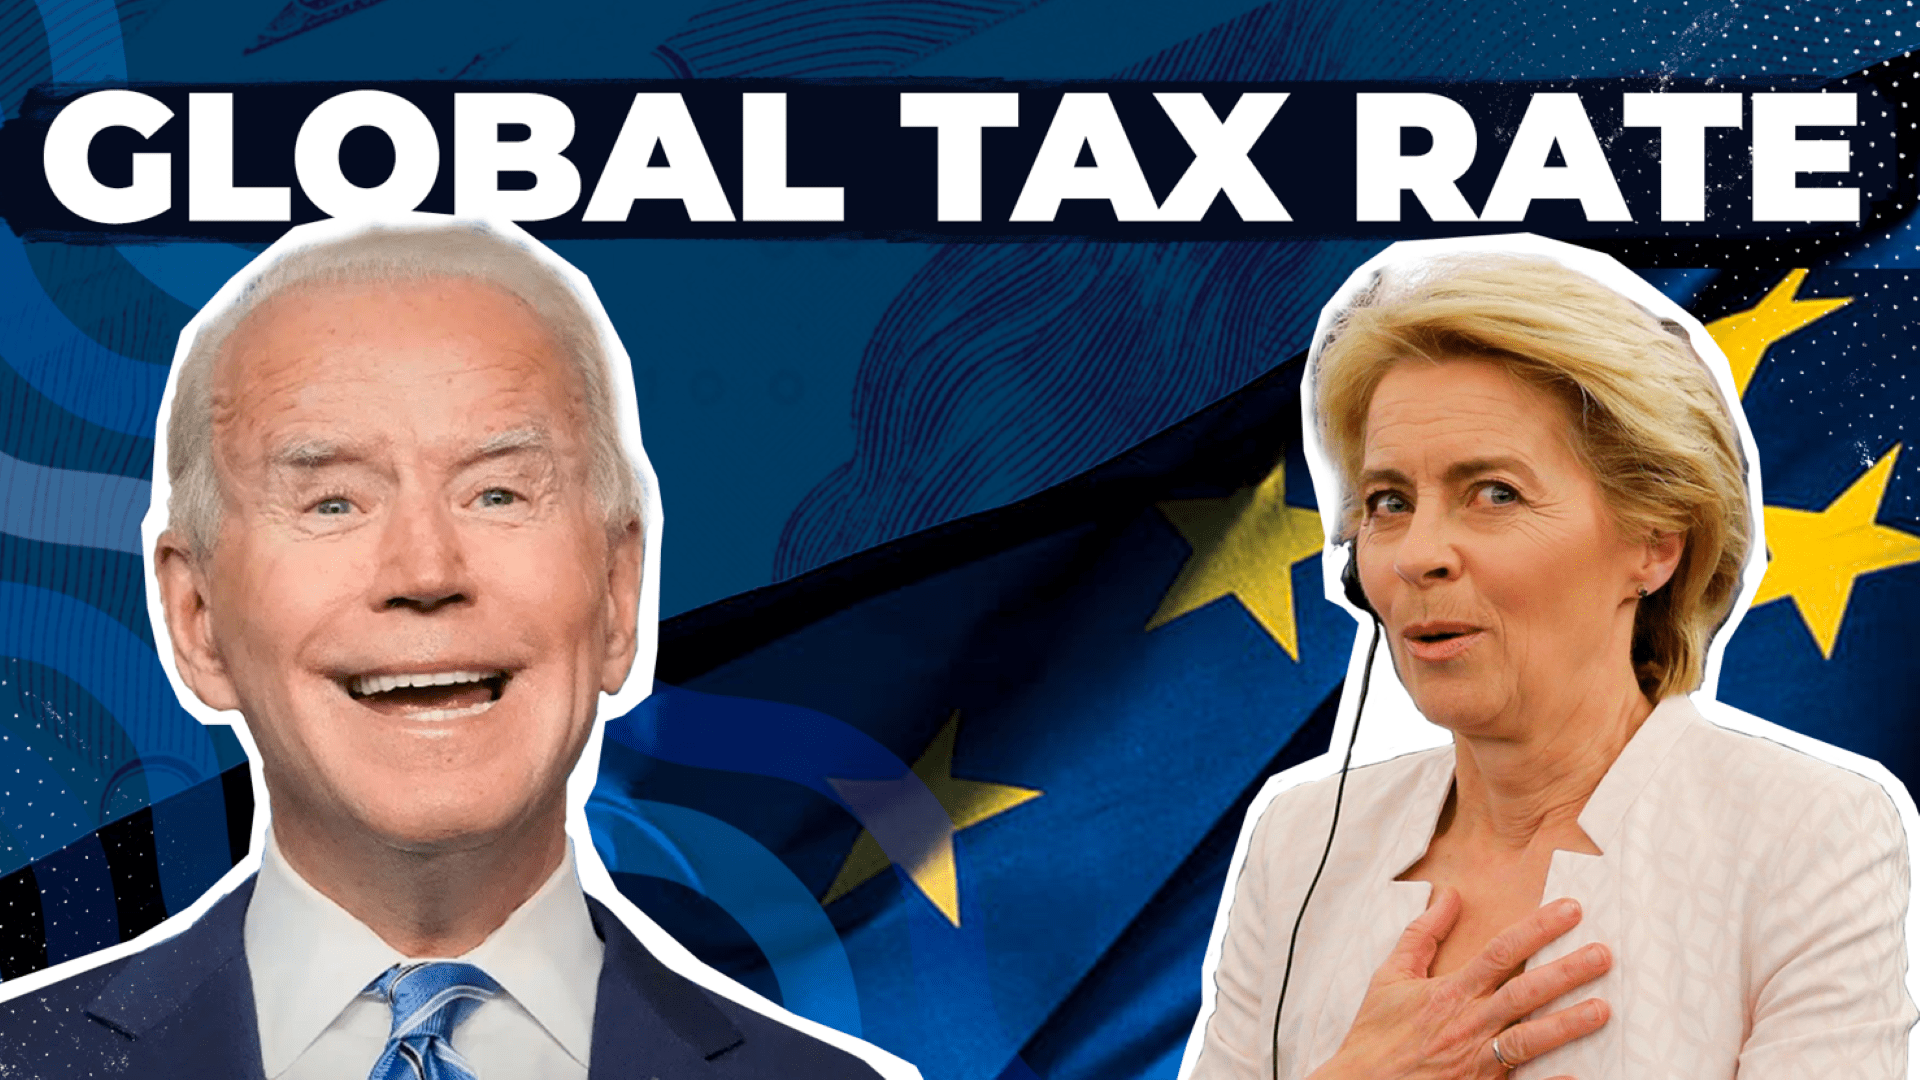 The G7's recent plan for a global minimum tax rate of 15% is a terrible idea that will hurt consumers and restrict competition.